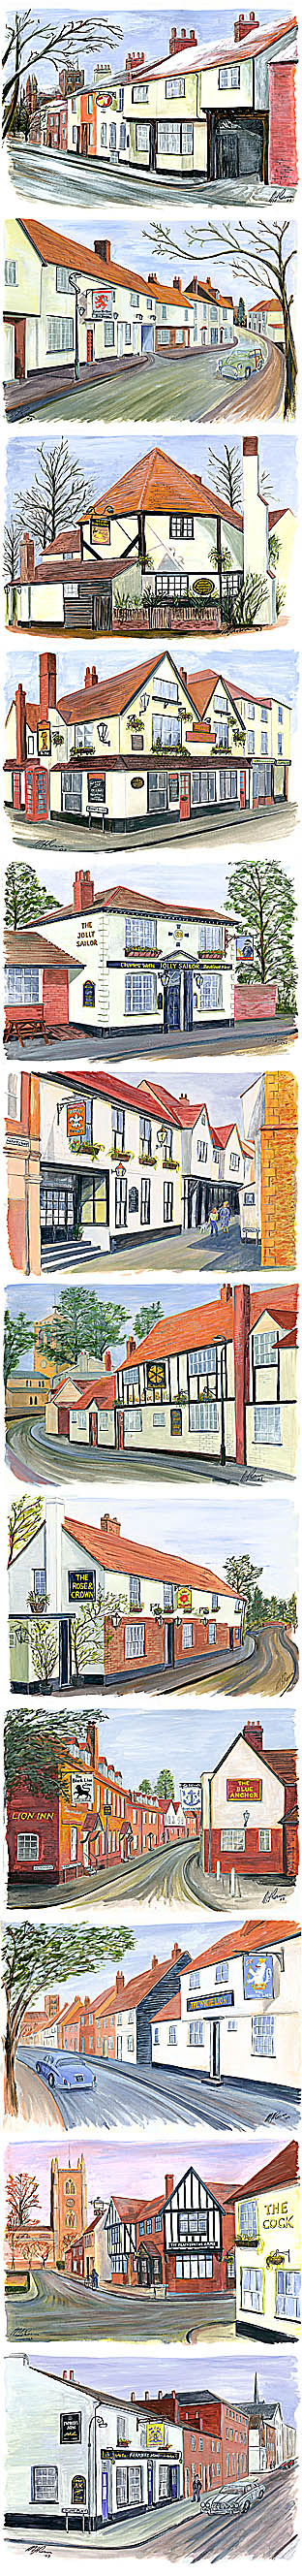 paintings of the pubs of st albans for calendar